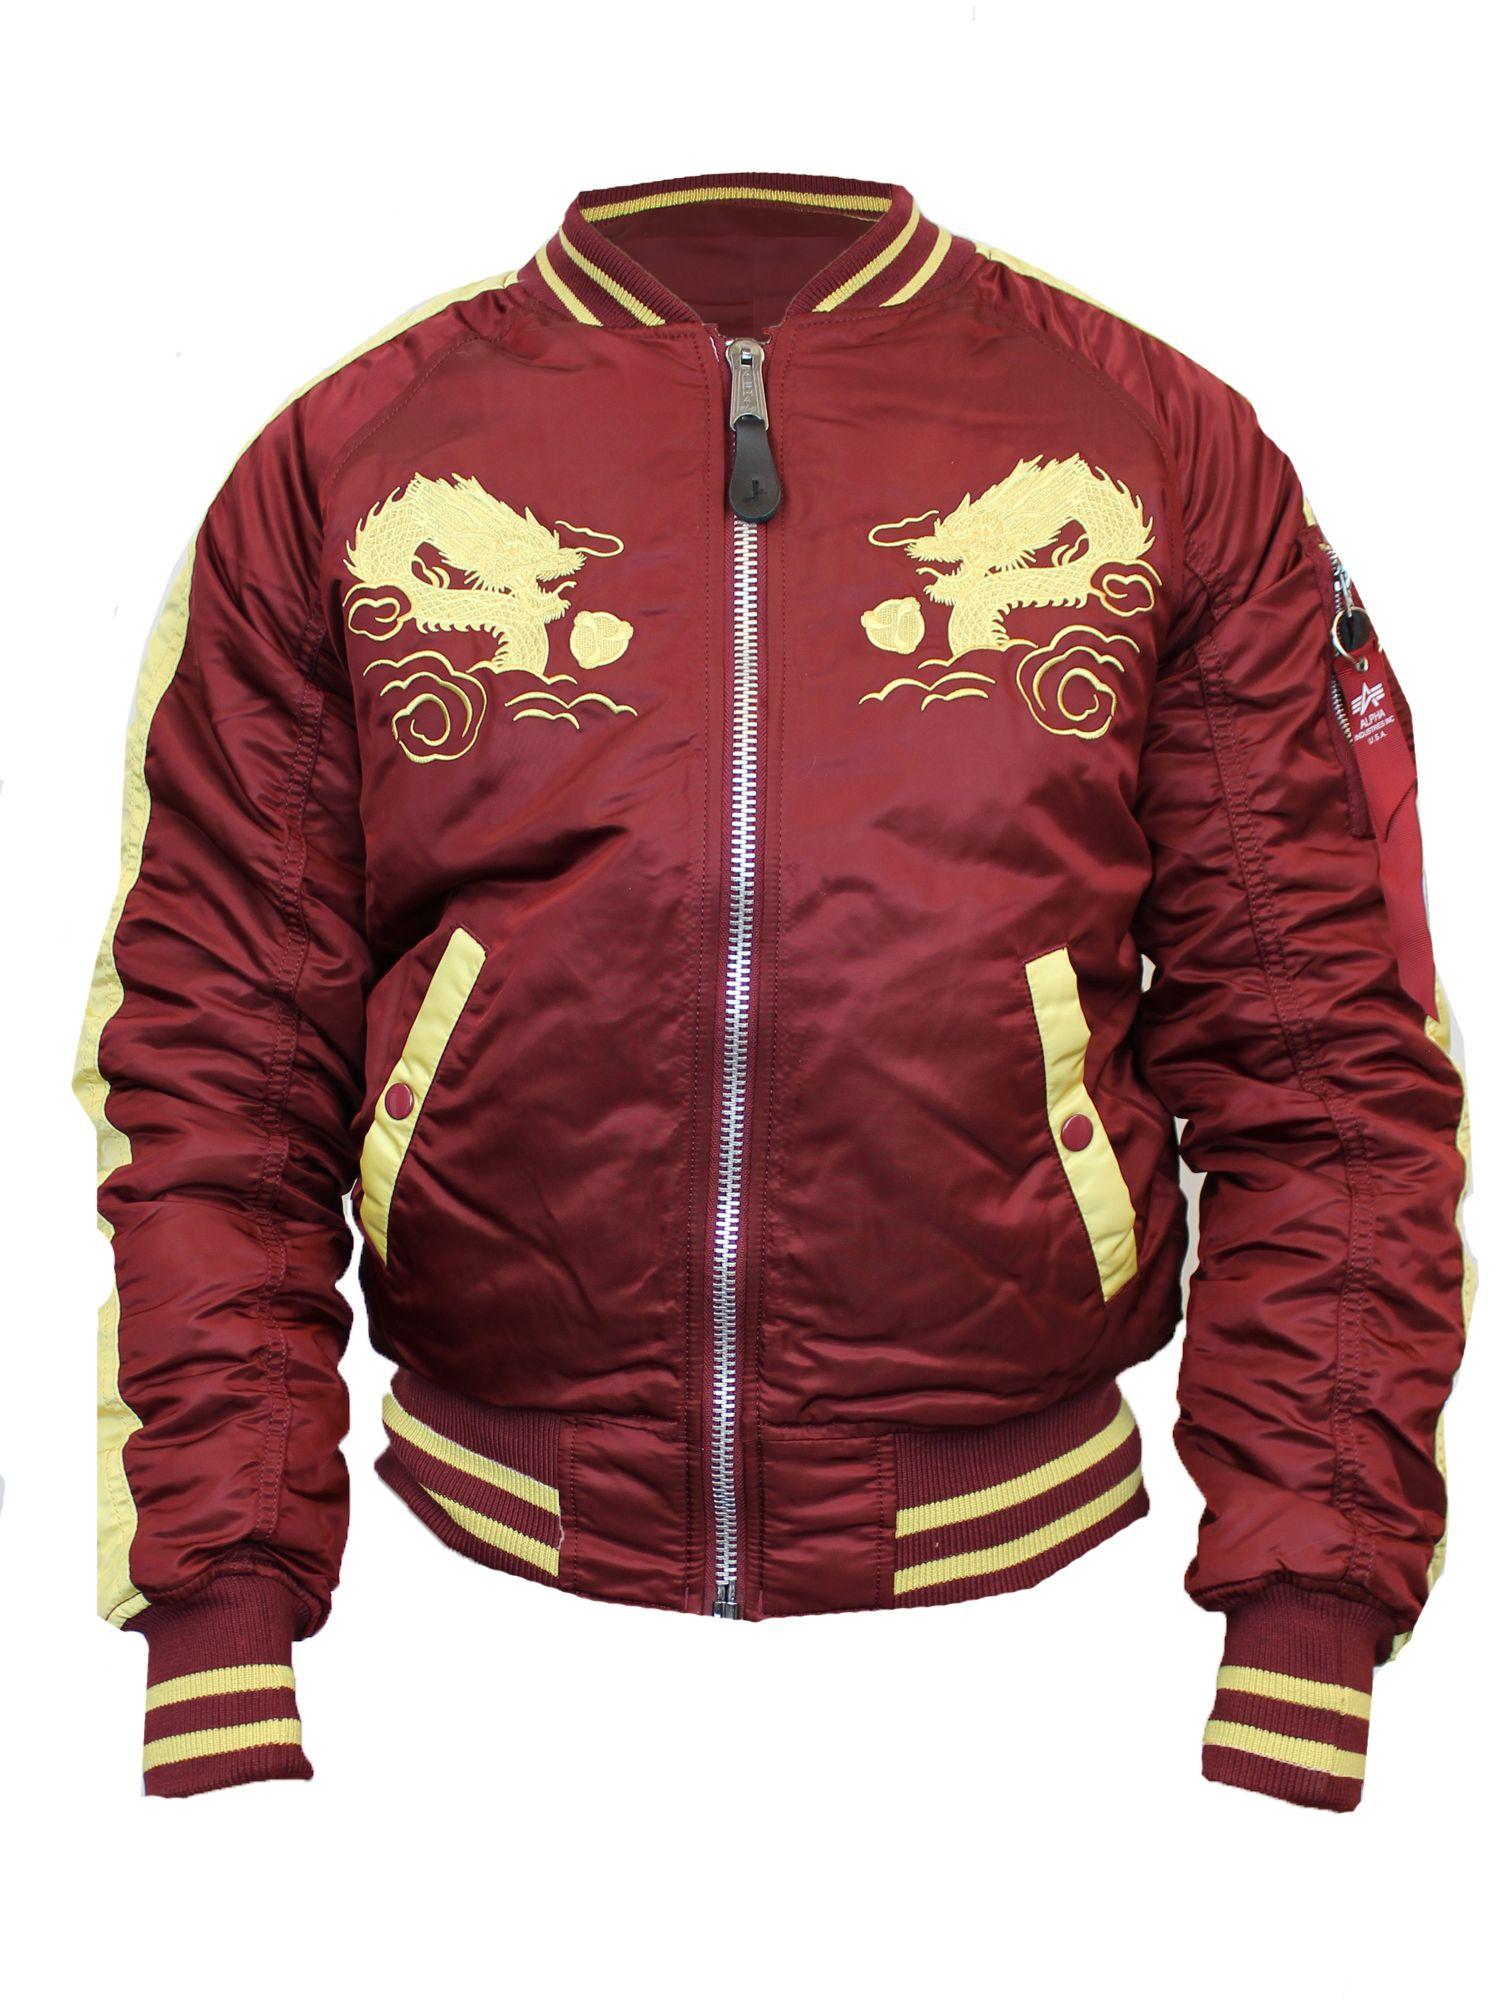 Alpha Industries Synthetic Japan Dragon Bomber Jacket in Burgundy (Red